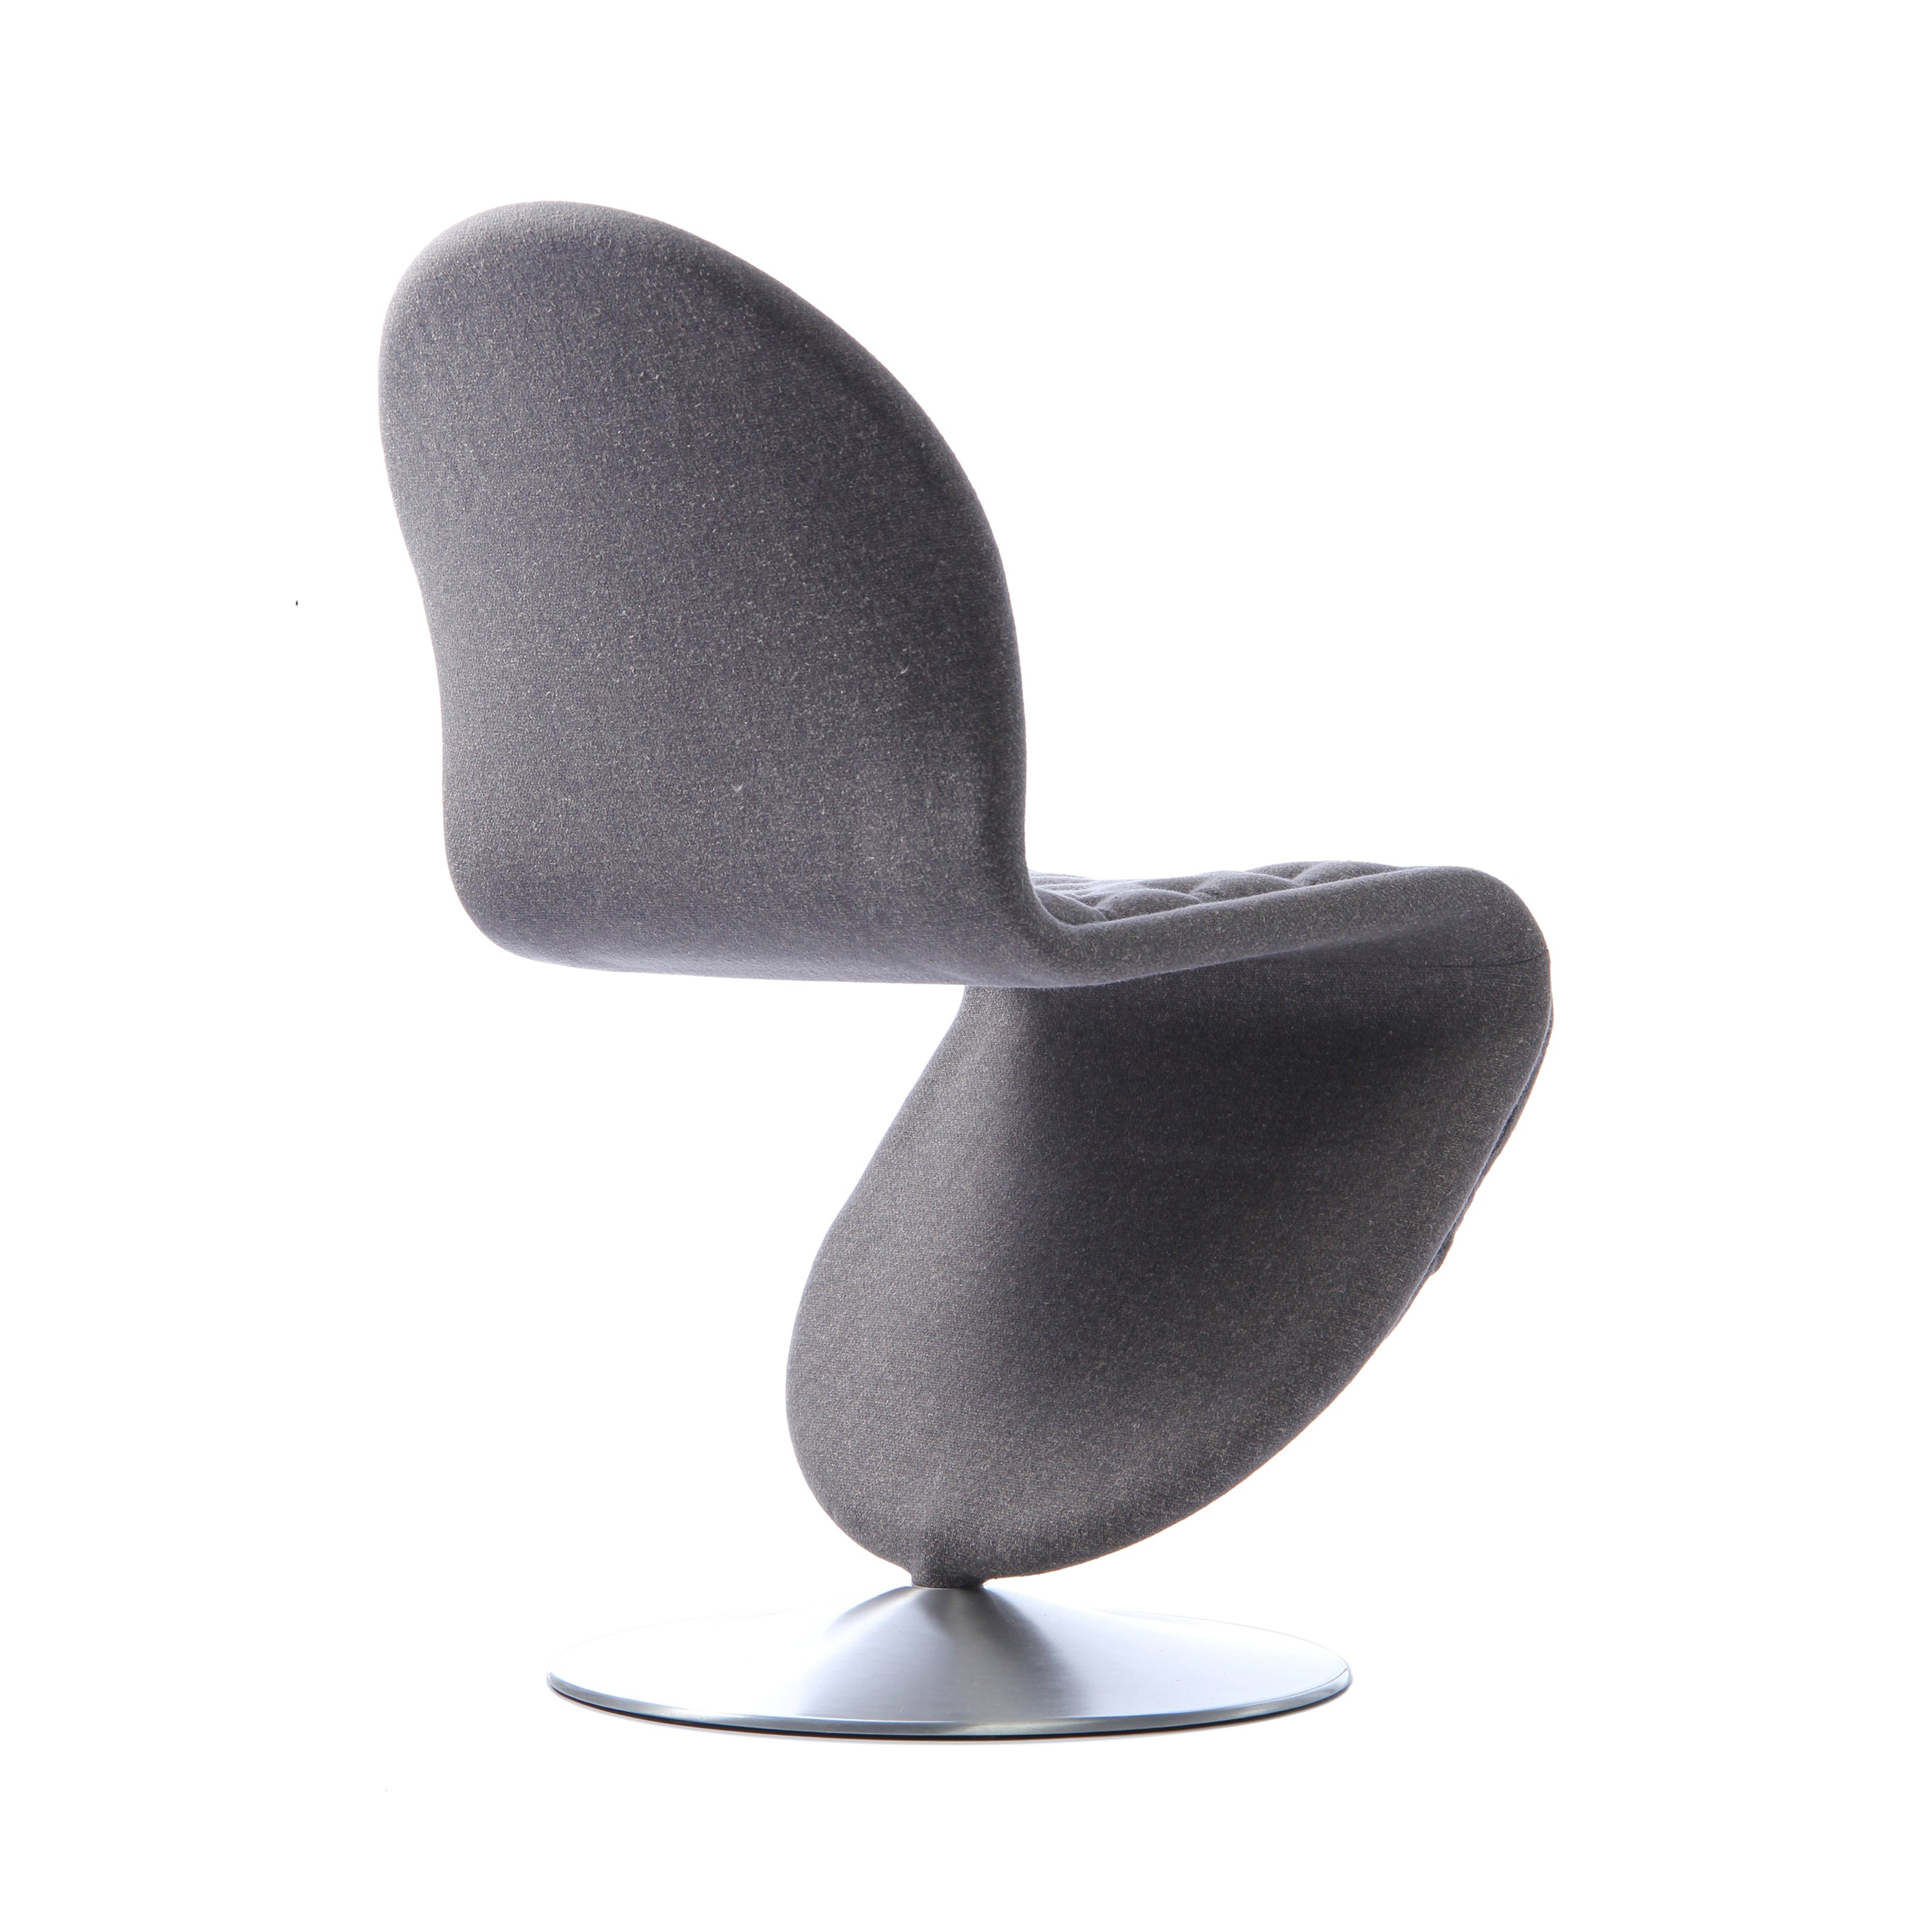 System 1-2-3 Dining Chair: Deluxe + Round